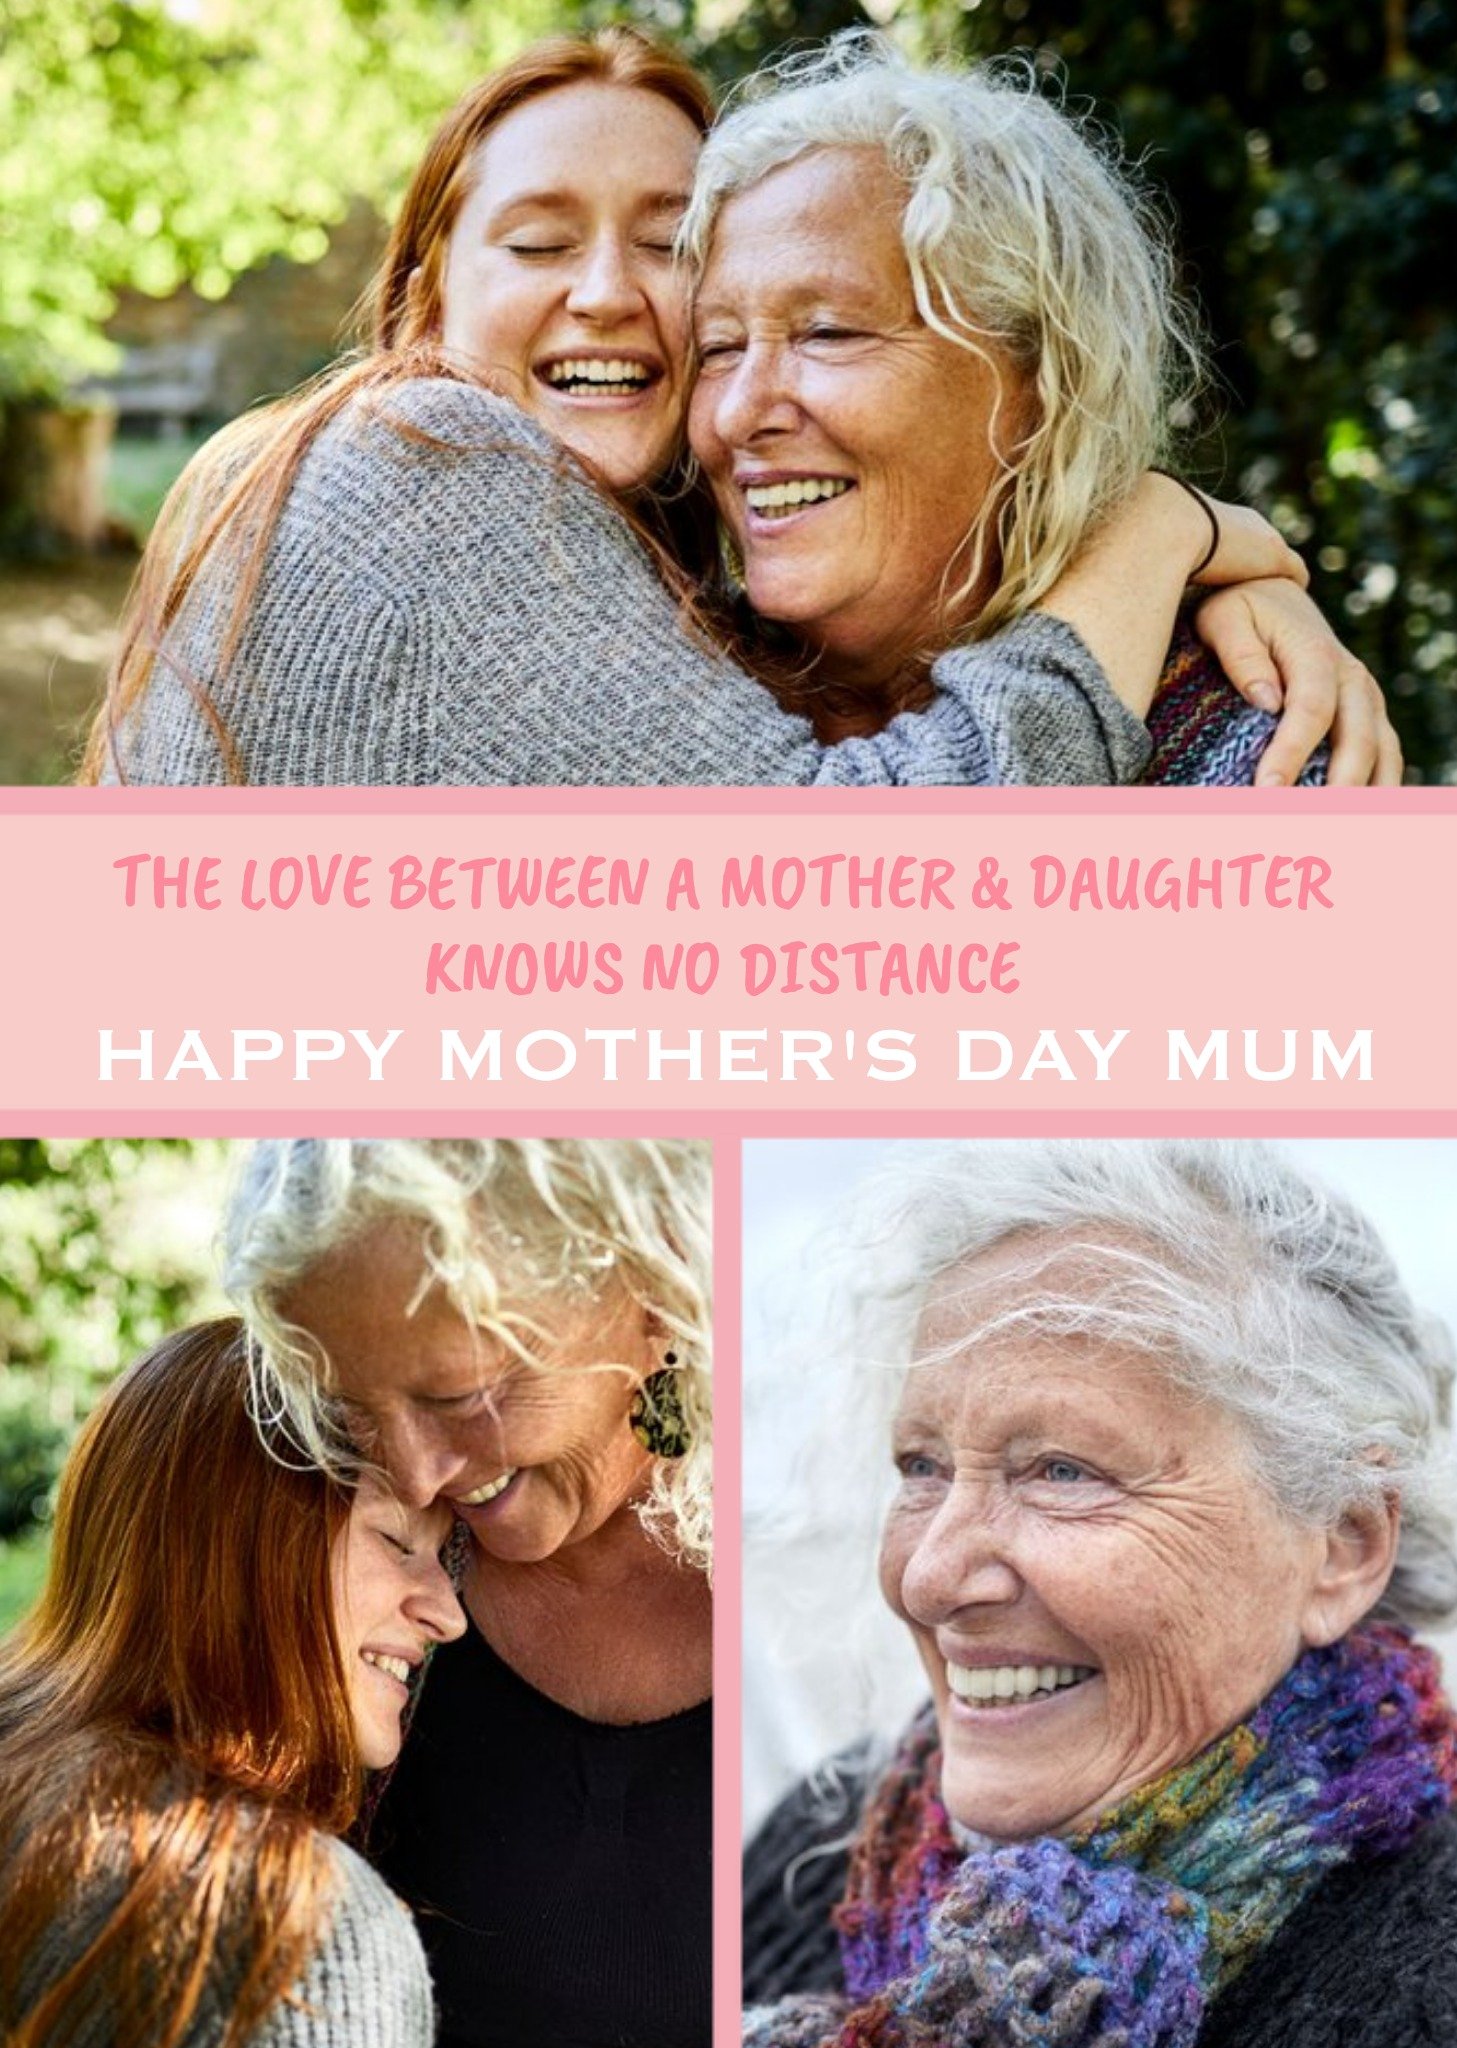 Moonpig The Love Between A Mother And Daughter Knows No Distance Photo Upload Mothers Day Card Ecard